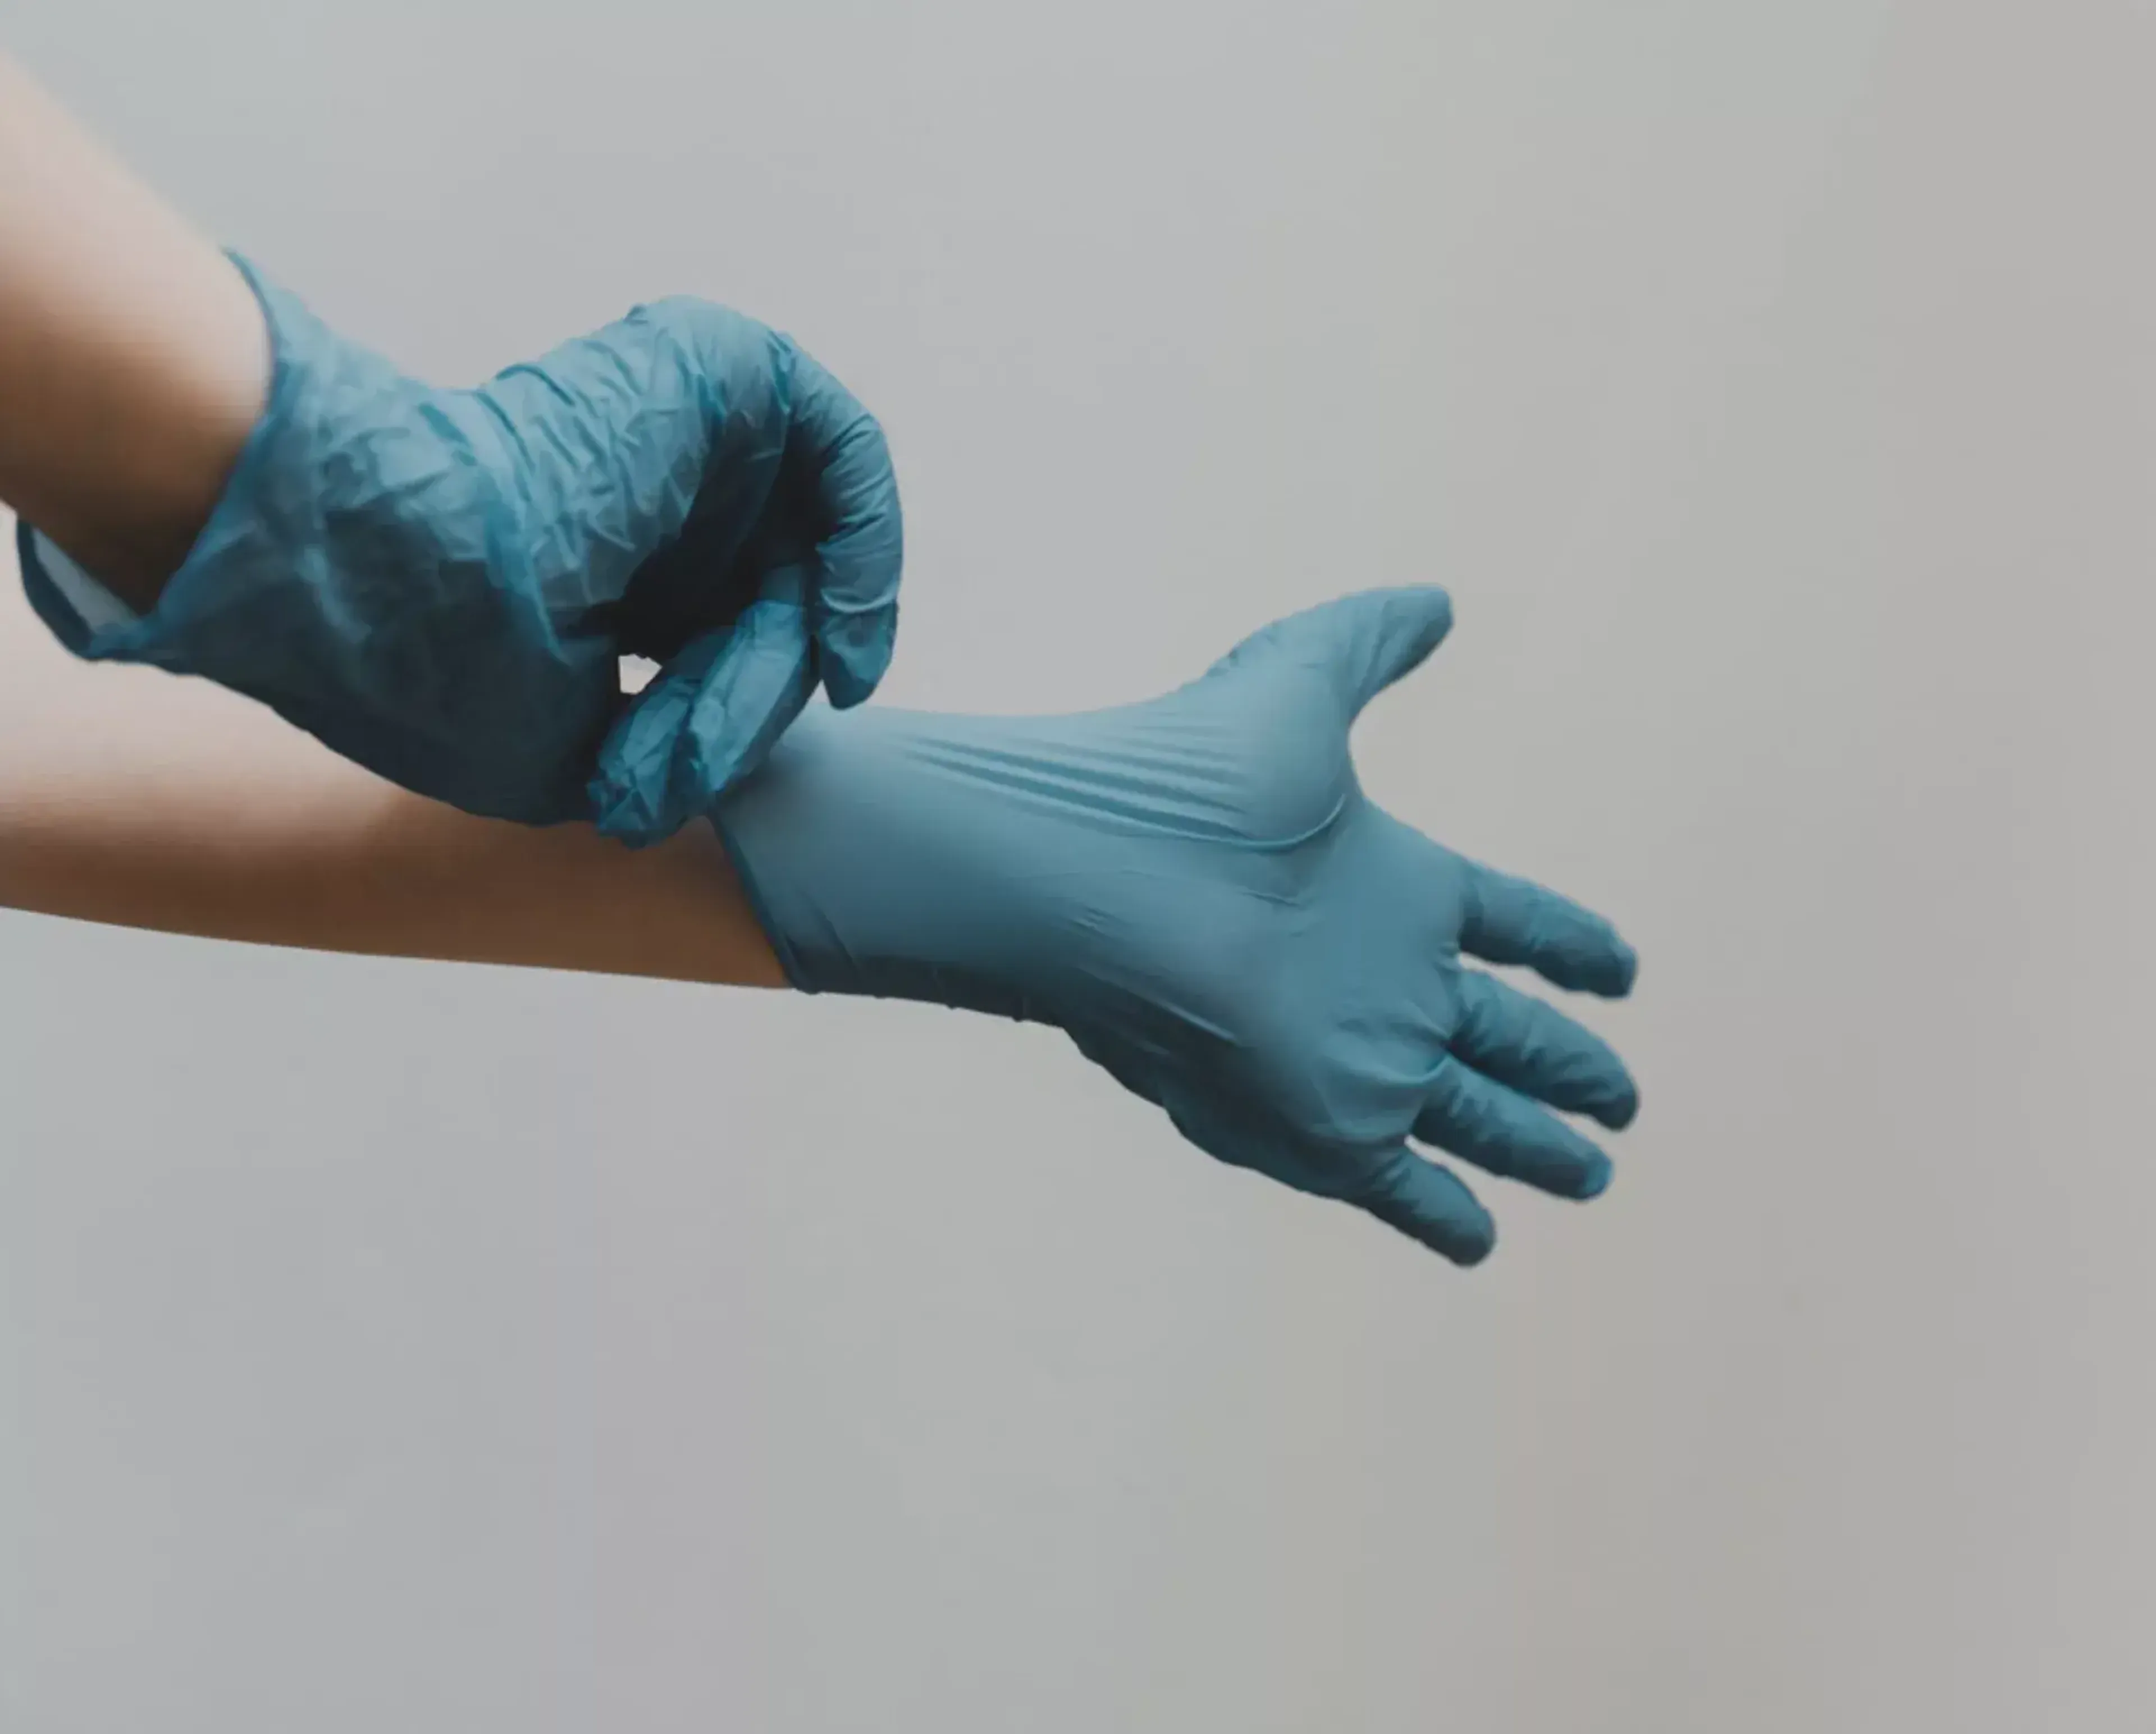 Hands with latex gloves - photo by Clay Banks on Unsplash